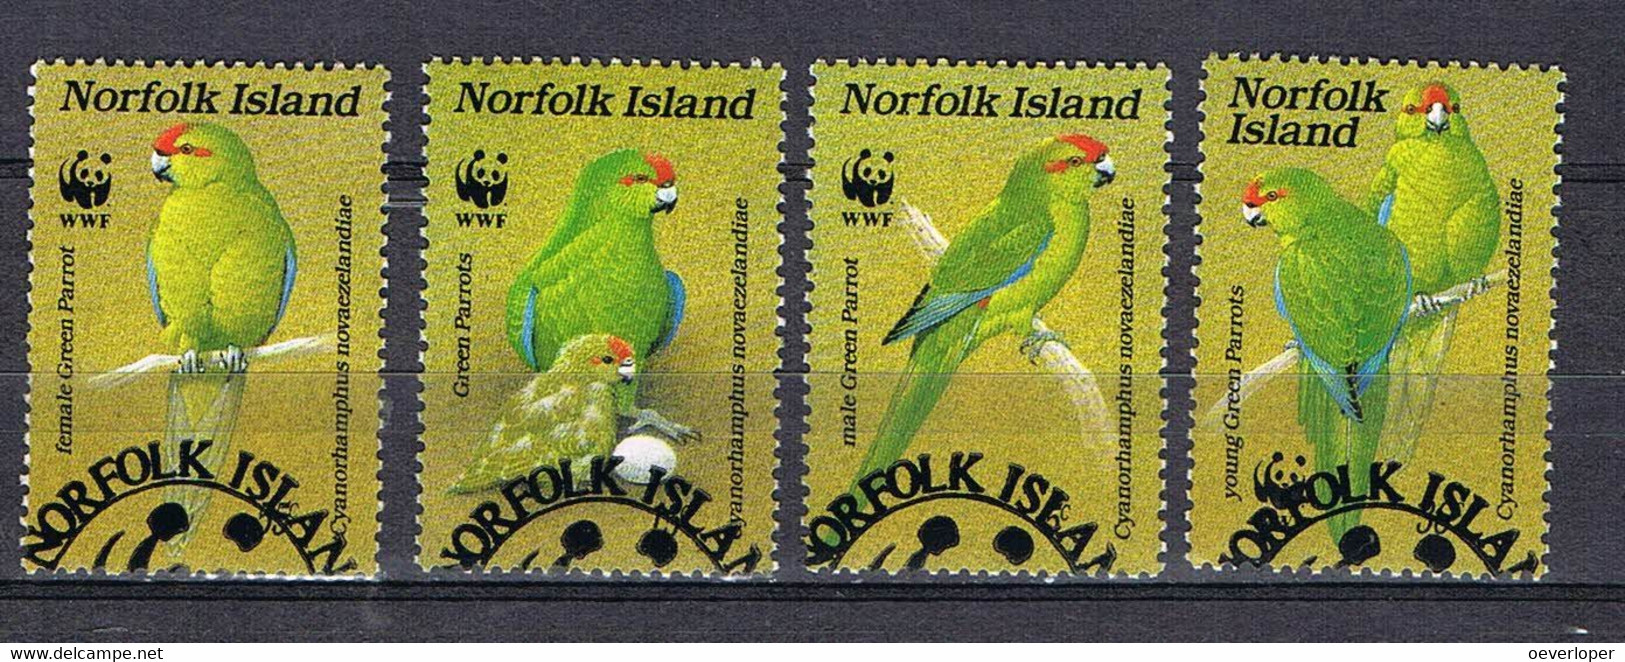 Norfolk Island Parrot 1987 Used - Used Stamps